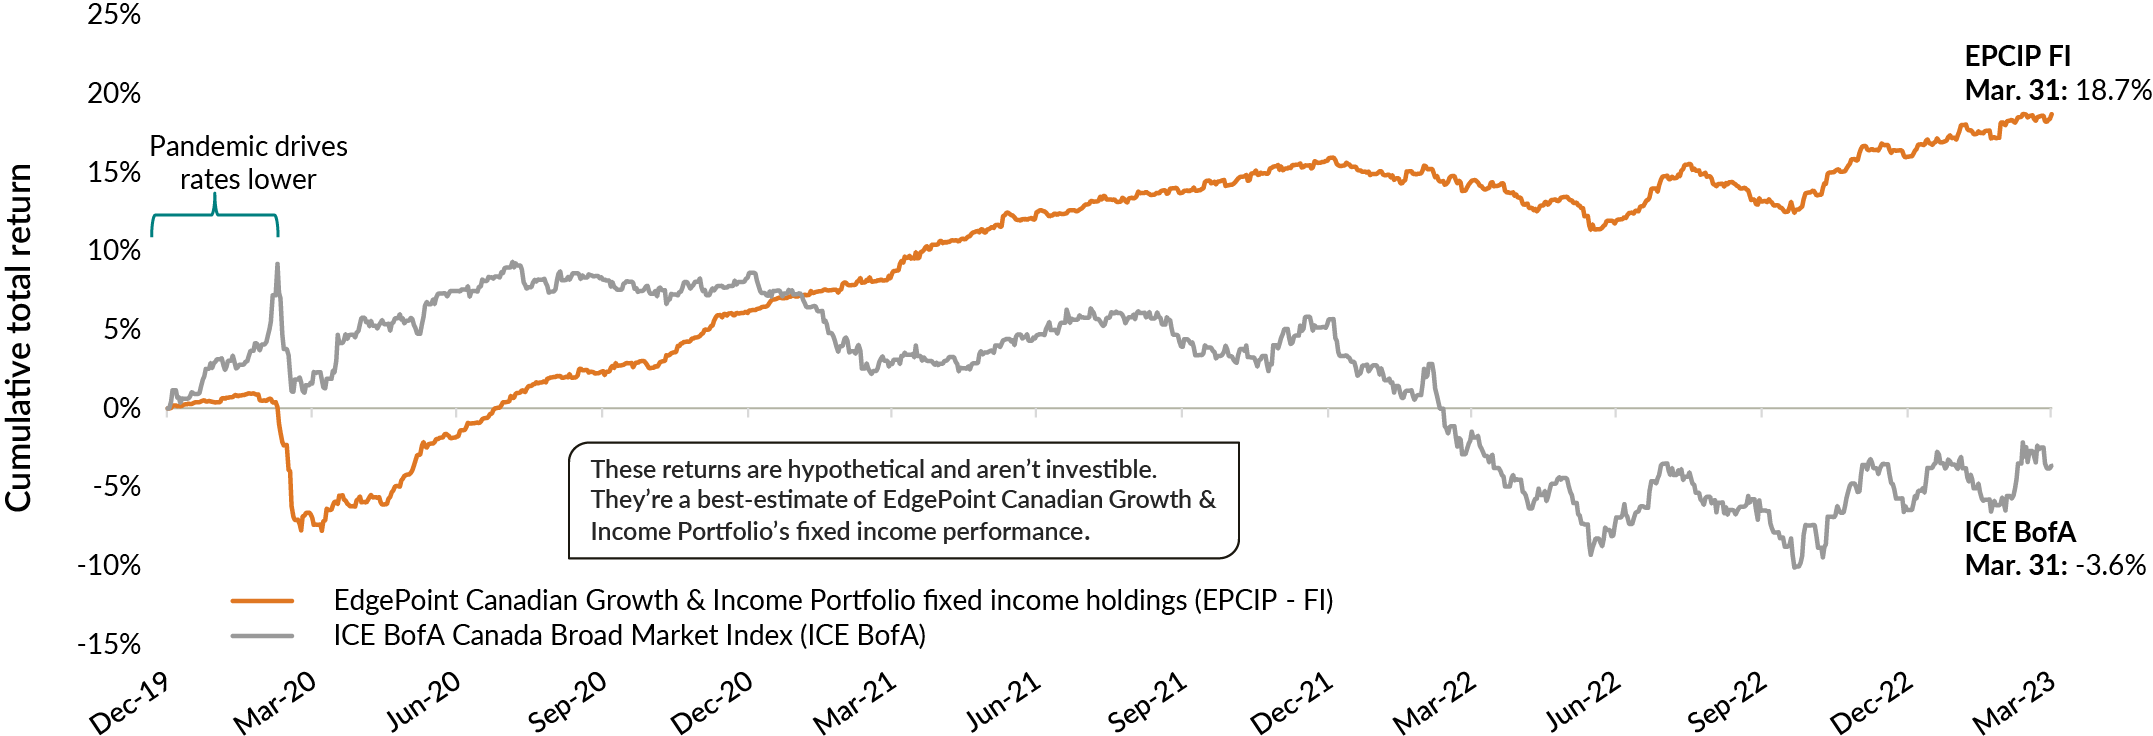 A line chart comparing the hypothetical and non-investible returns of the fixed income portfion EdgePoint Canadian Growth & Income Portfolio versus the ICE BofA Canada Broad Market Index between December 31, 2019 and March 31, 2023. 

EdgePoint Canadian Growth & Income Portfolio - fixed income: 18.7%
ICE BofA Canada Broad Market Index: -3.6%